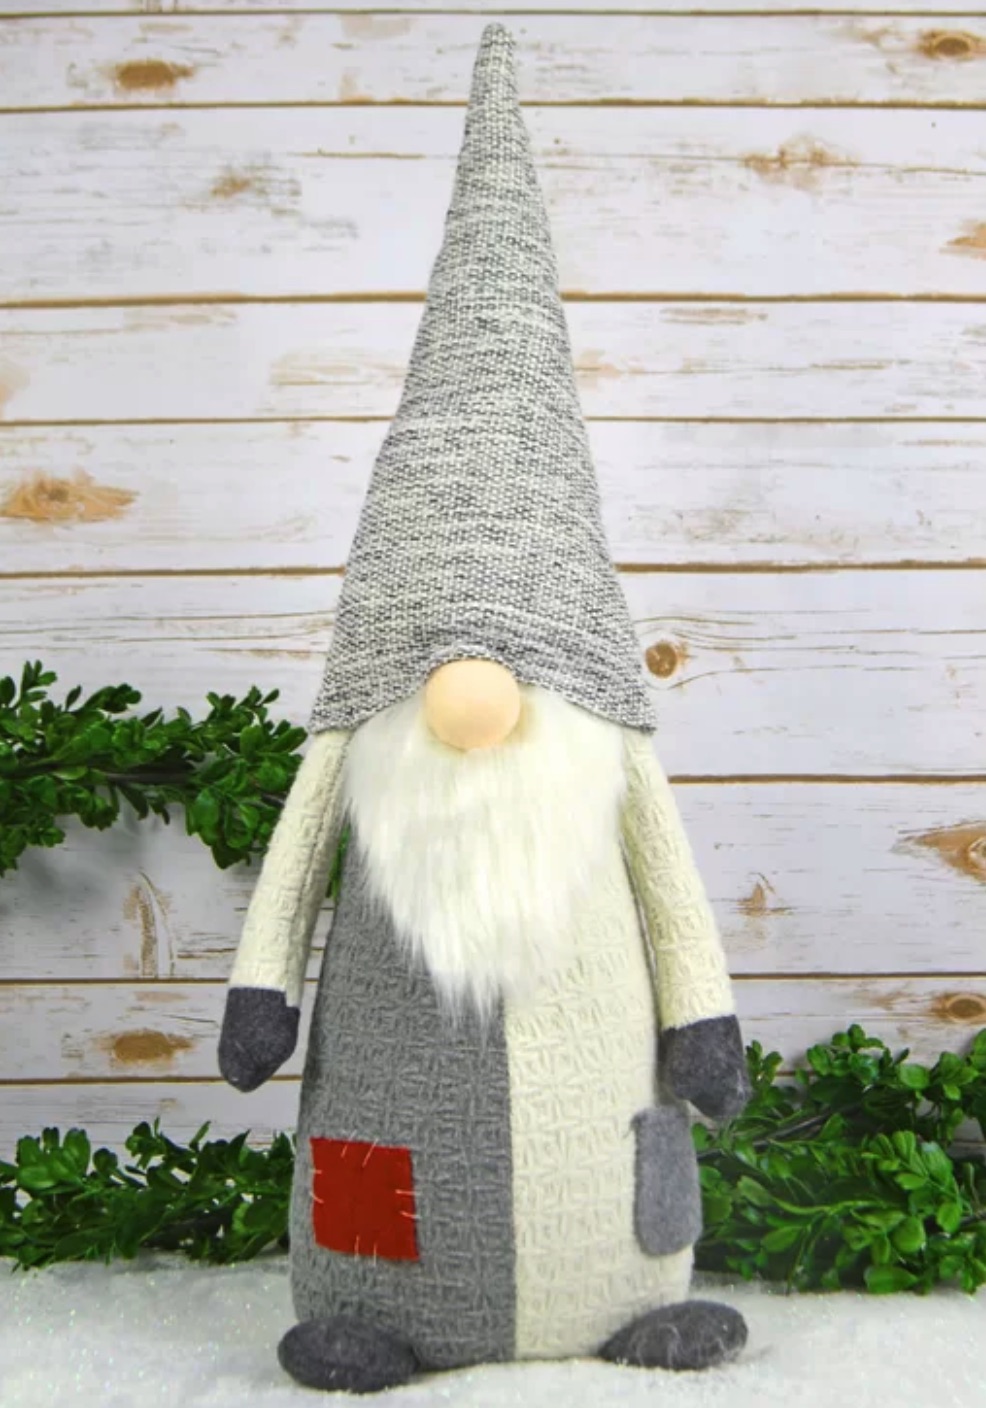 For the Home Jarl Fabric Gnome Decoration #Decor #Christmas #ChristmasDecor #HomeDecor #ChristmasHomeDecor #HolidayDecor